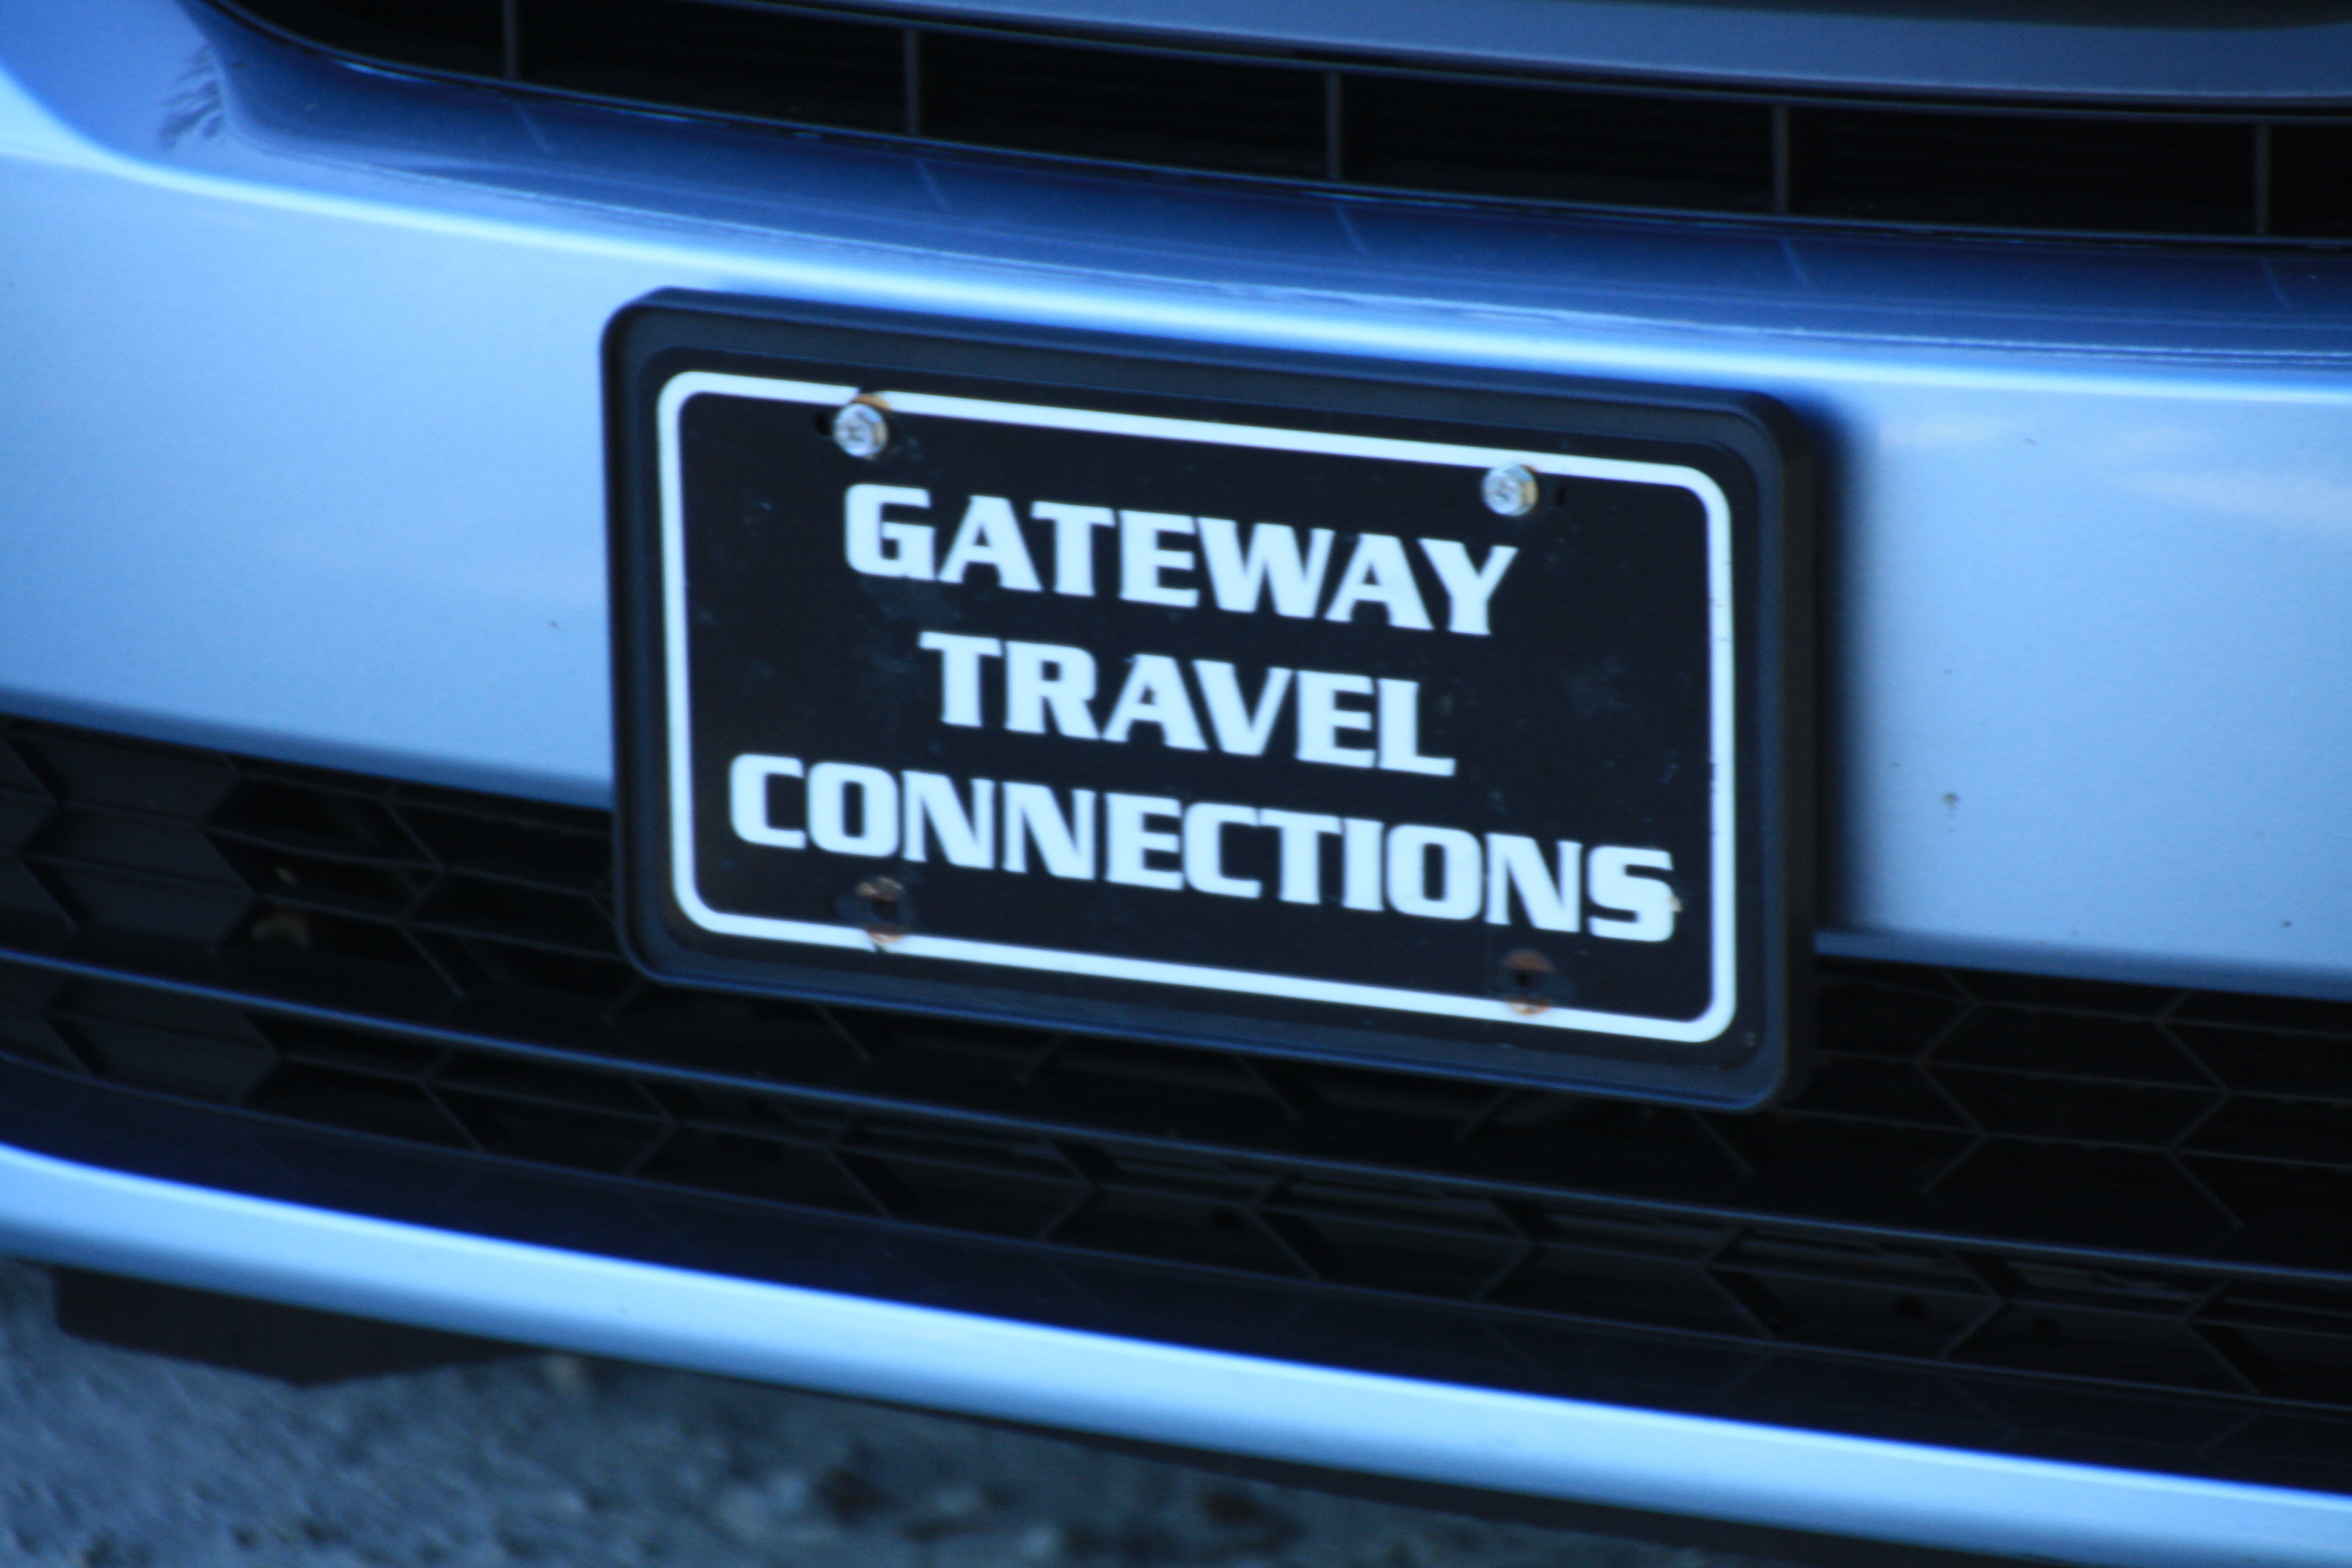 Gateway Travel Connections